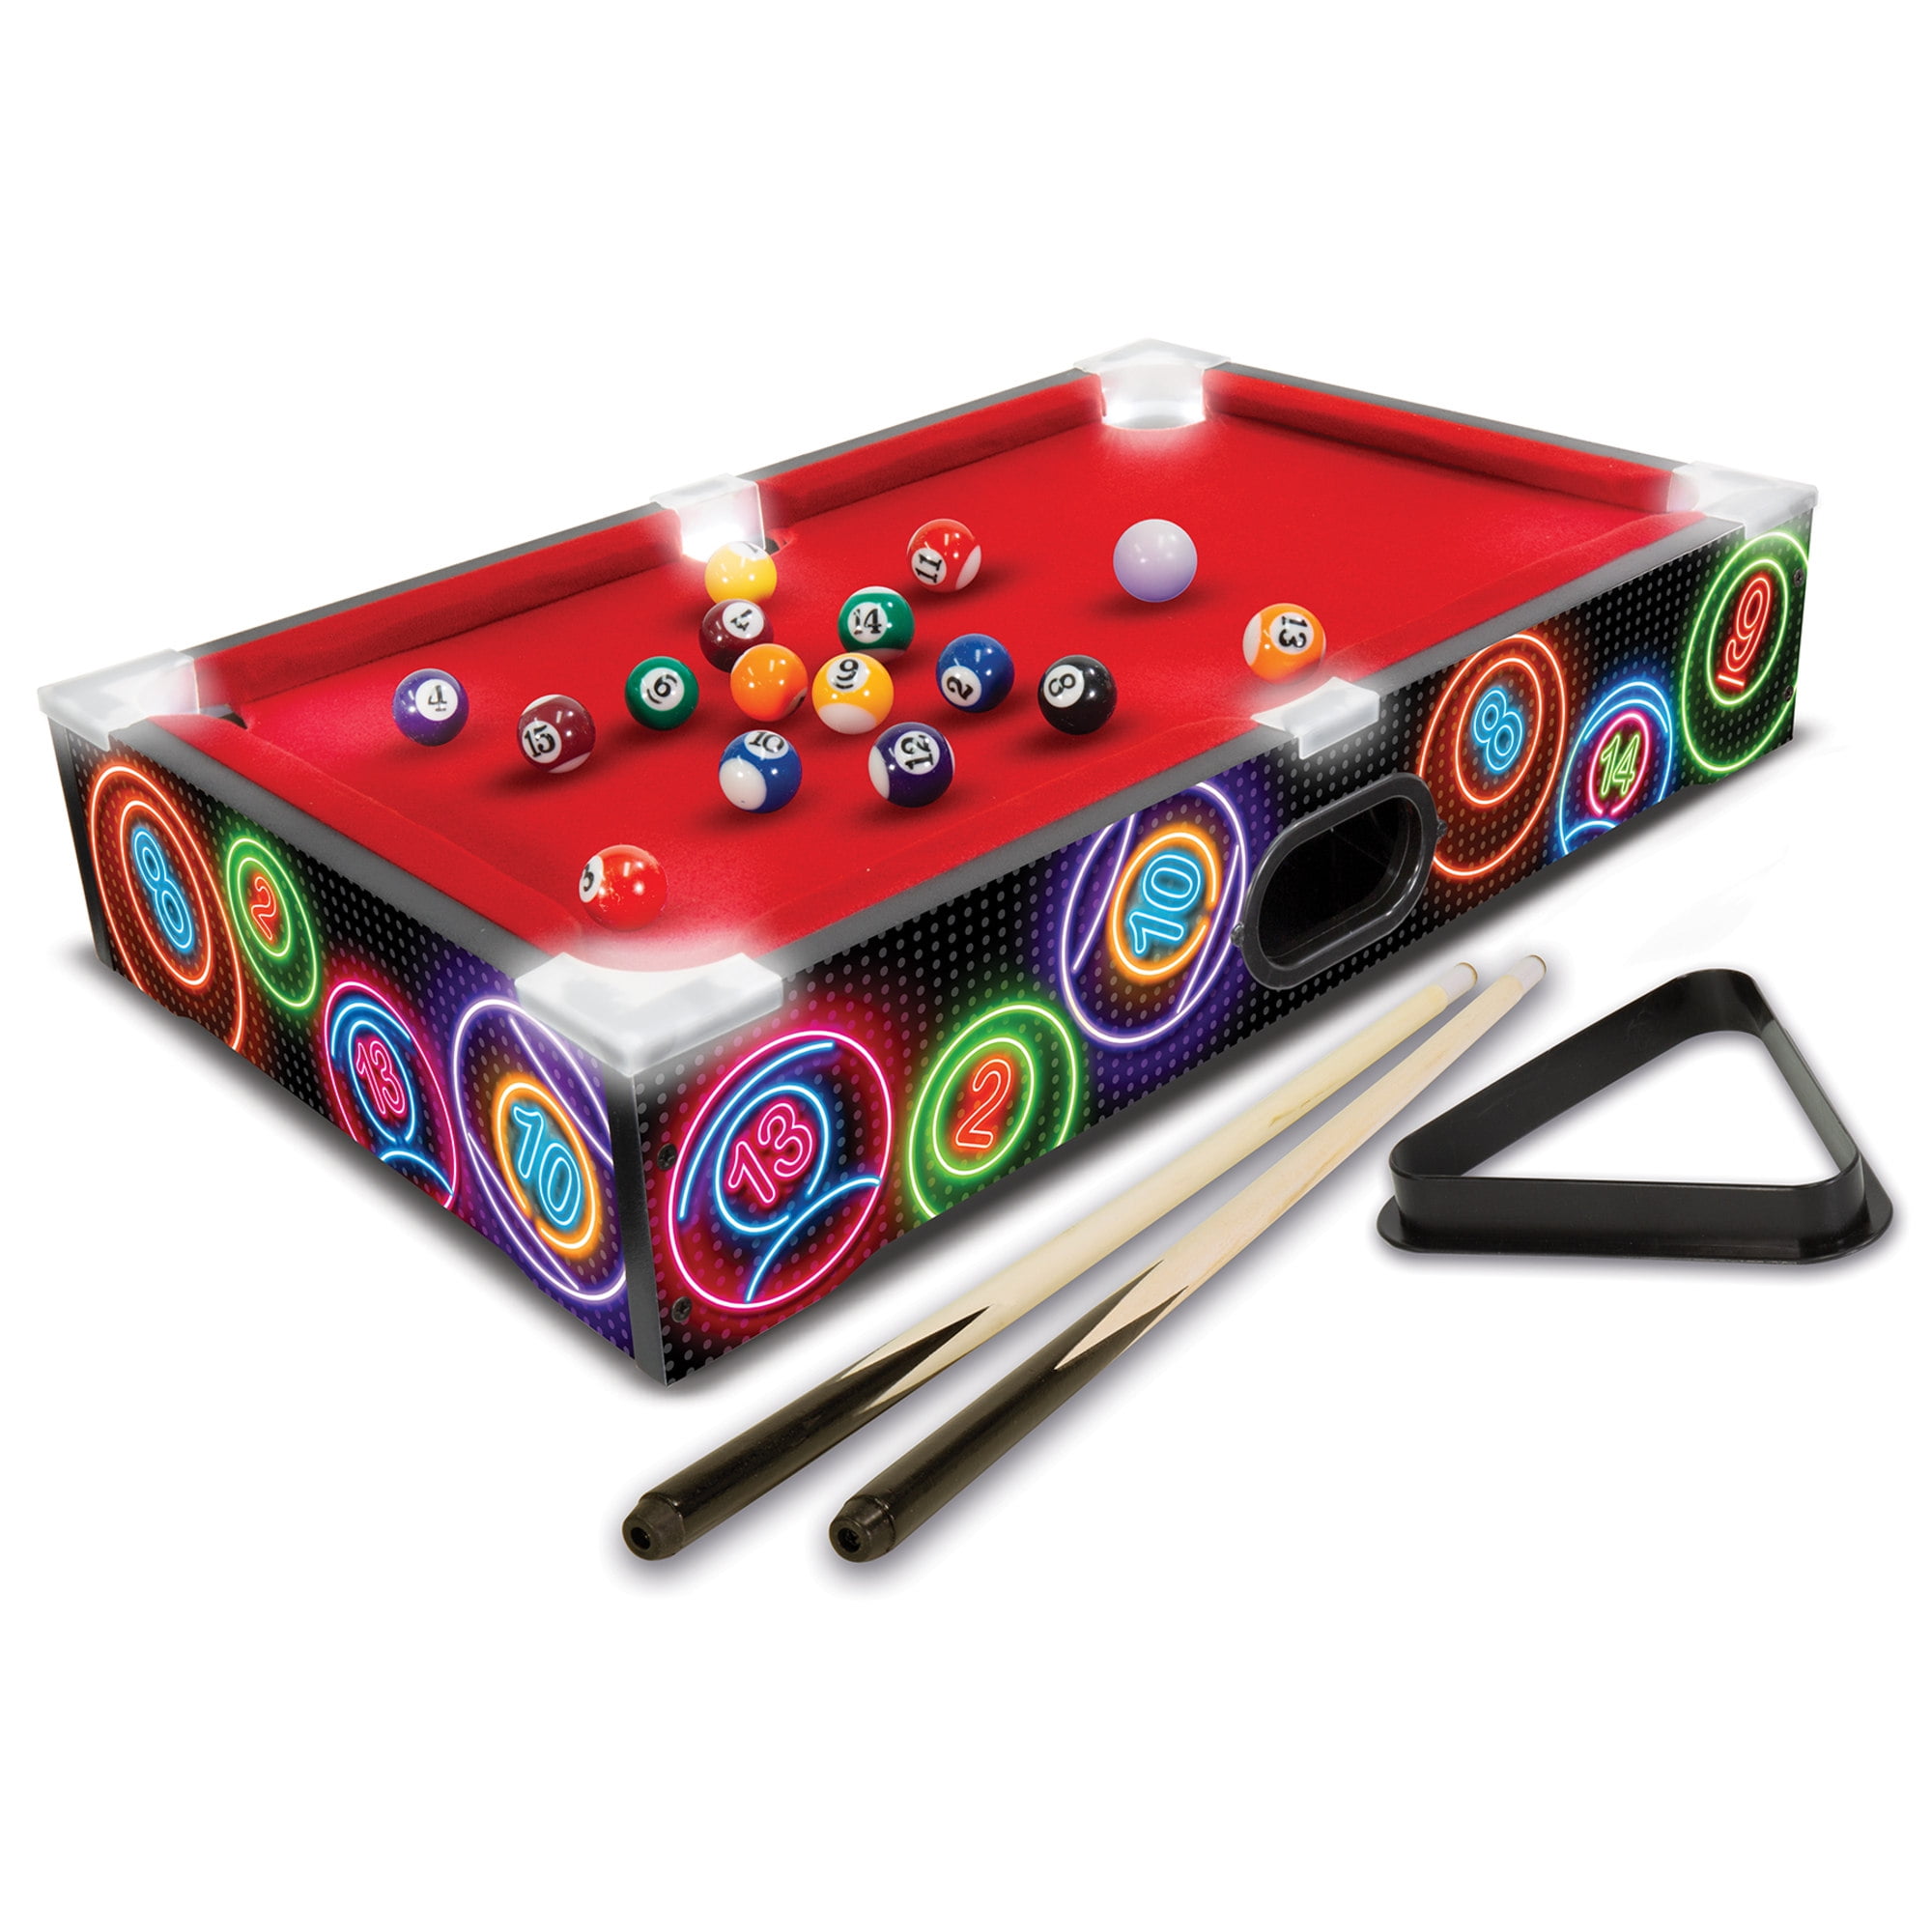 Phaser - News - 8-Ball Billiards: An authentic recreation of the classic  game of billiards with super-smooth gameplay, smart AI and lovely graphics.